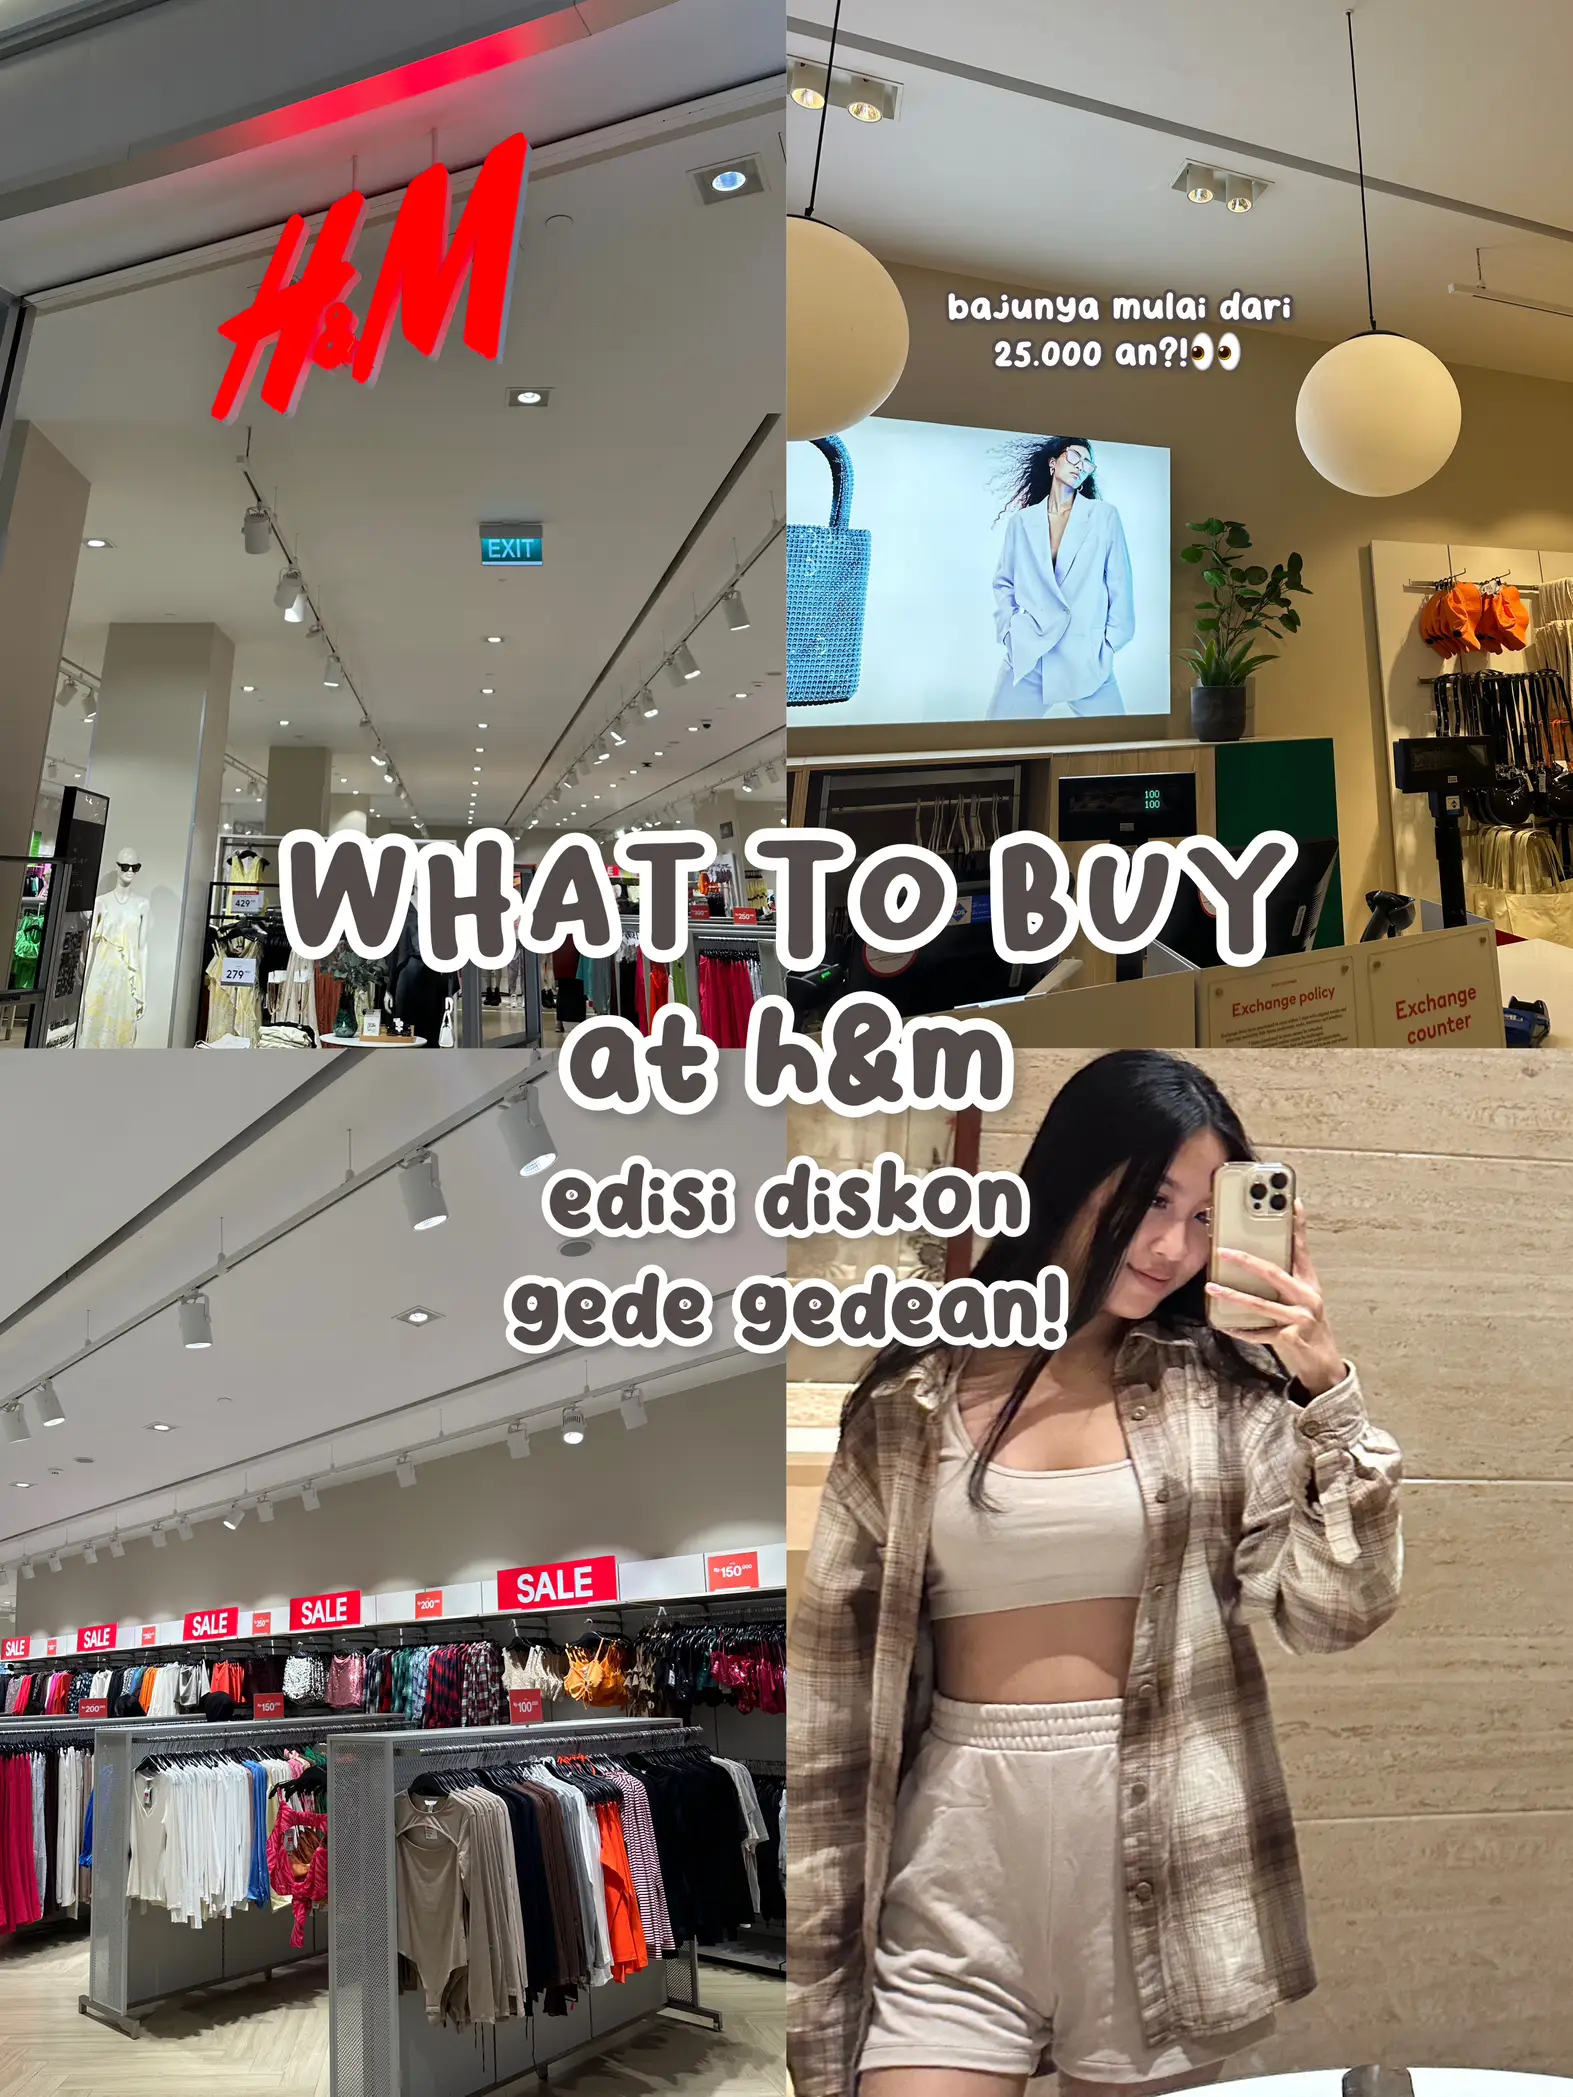 What to Buy at H&M